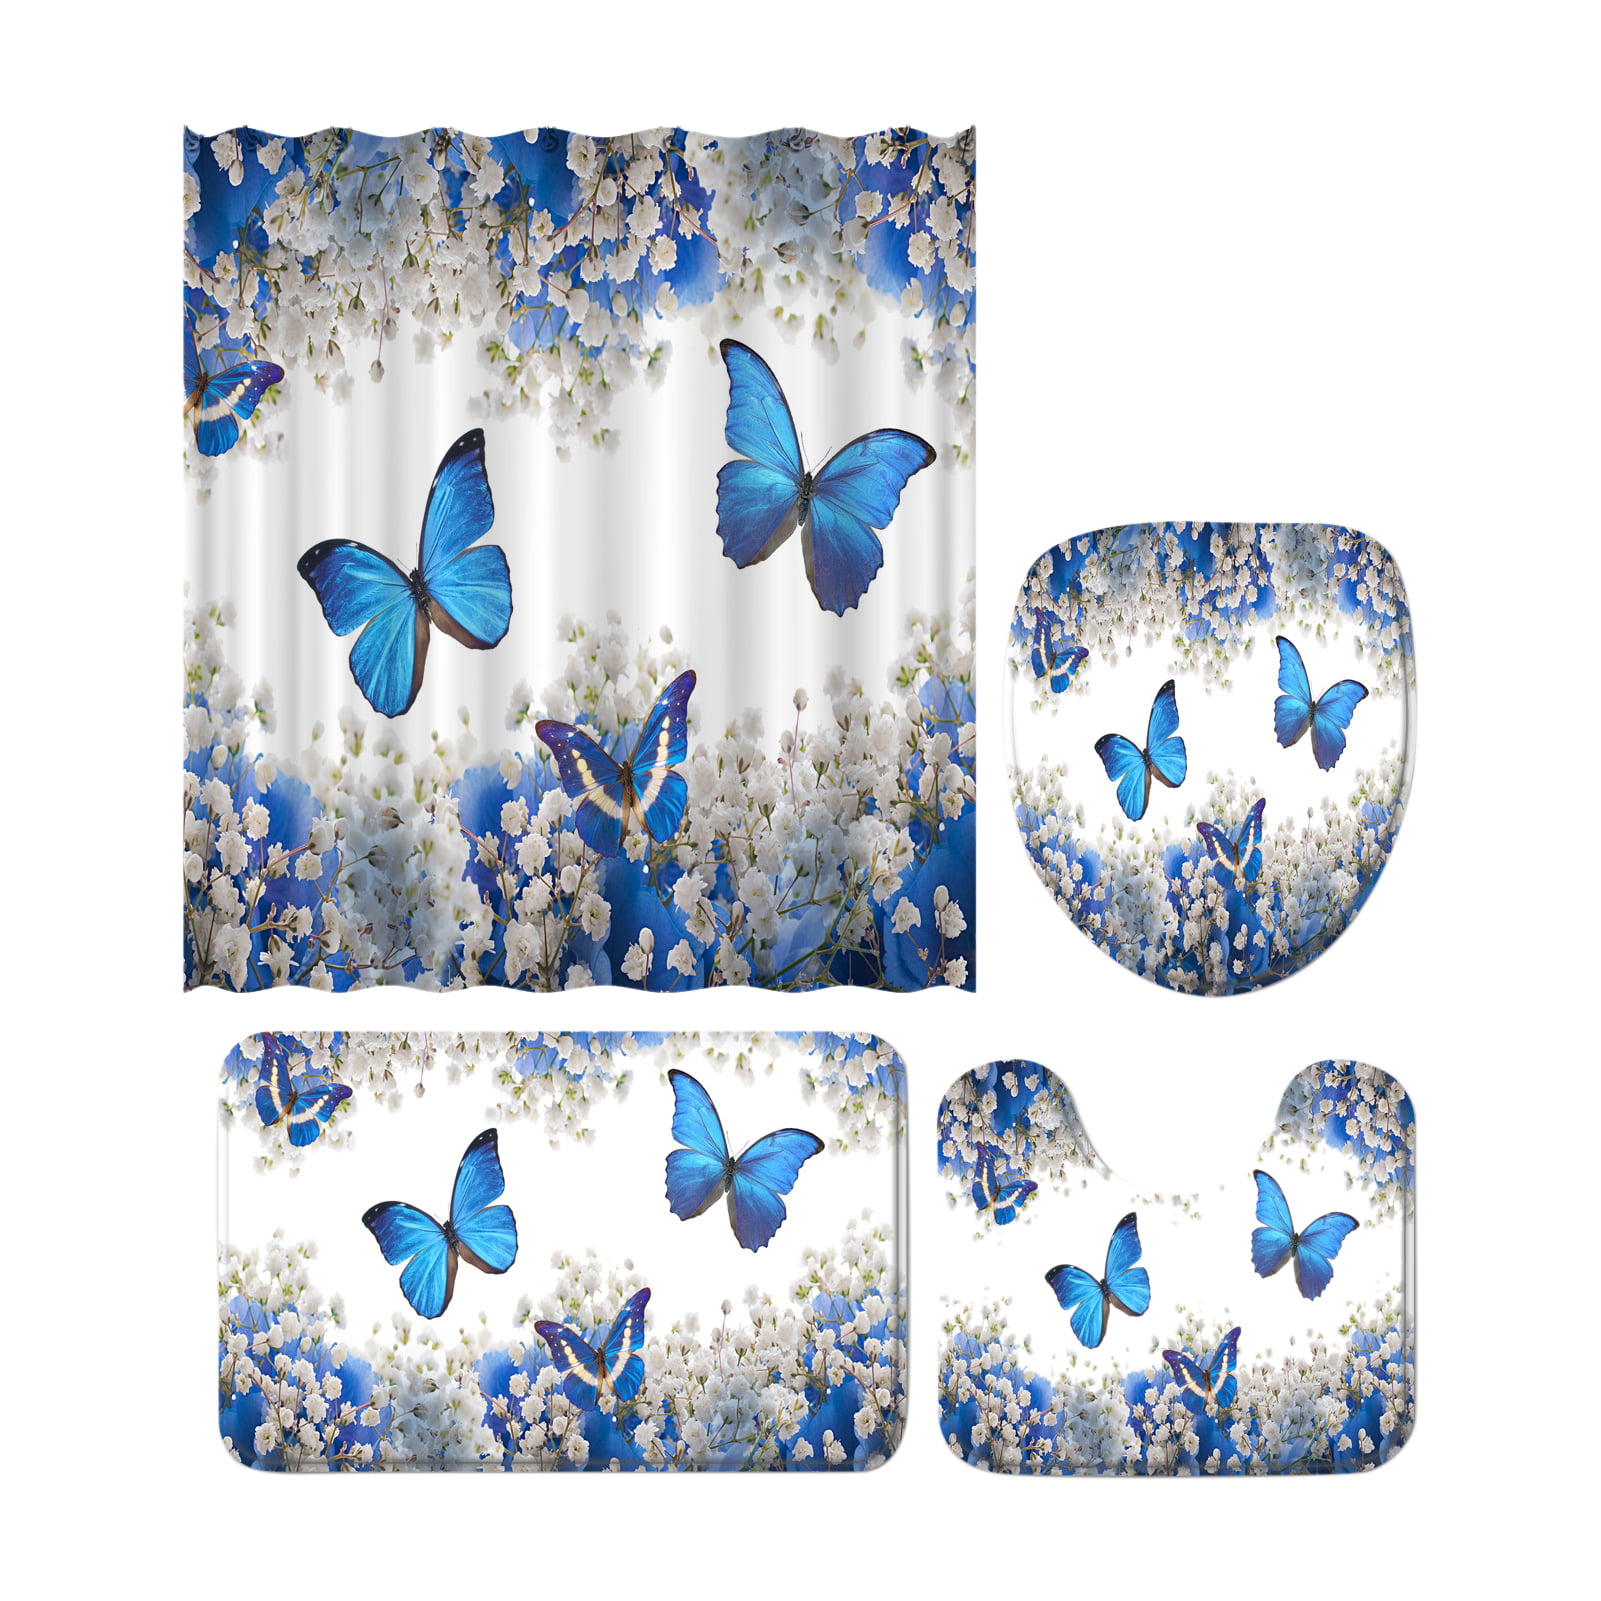 Details about   Home Bathroom Waterproof Shower Supplies Butterfly Decoration Shower Curtain SH 